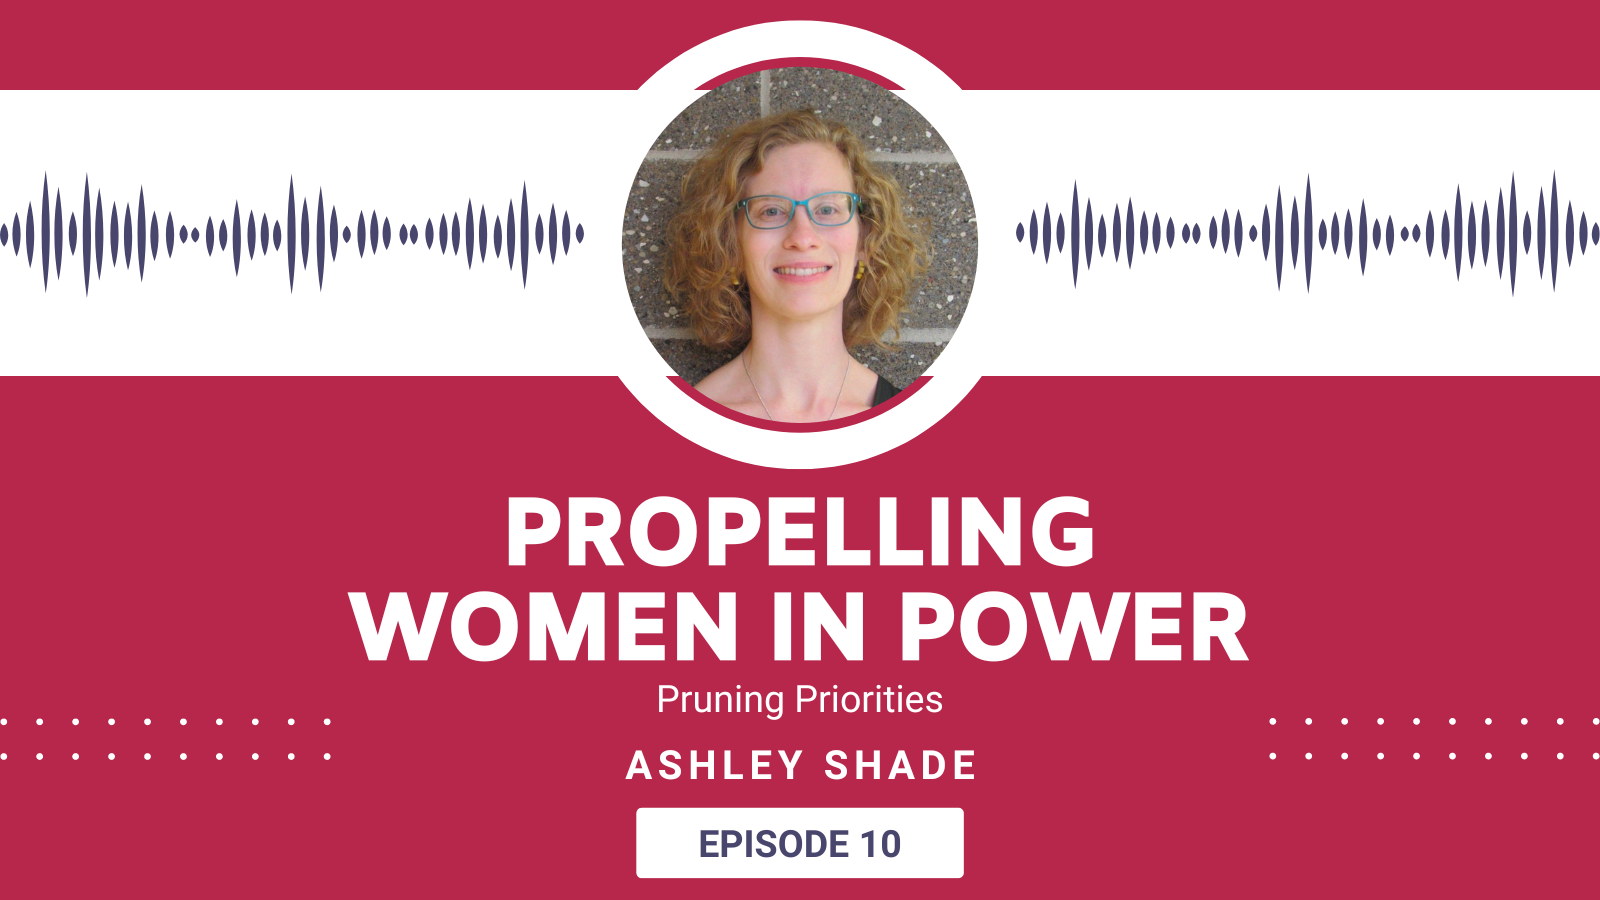 Headshot of Ashley Shade in Propelling Women in Power Banner. Episode titlted "Pruning Priorities" with Ashley Shade